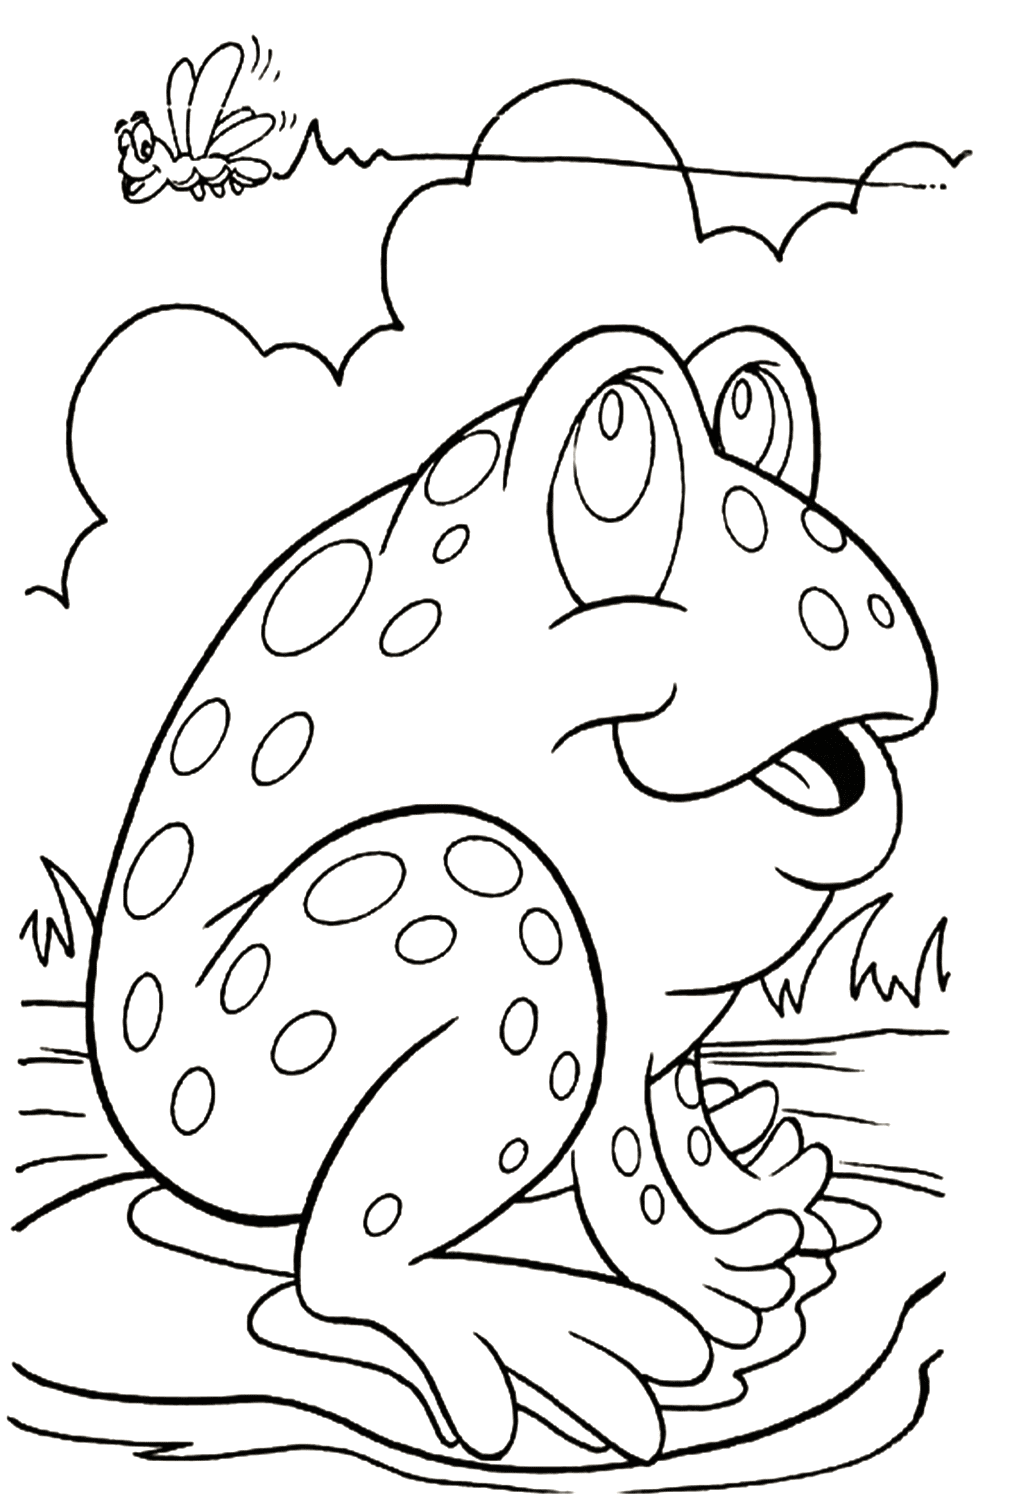 26 Free Printable Cane Toad Coloring Pages